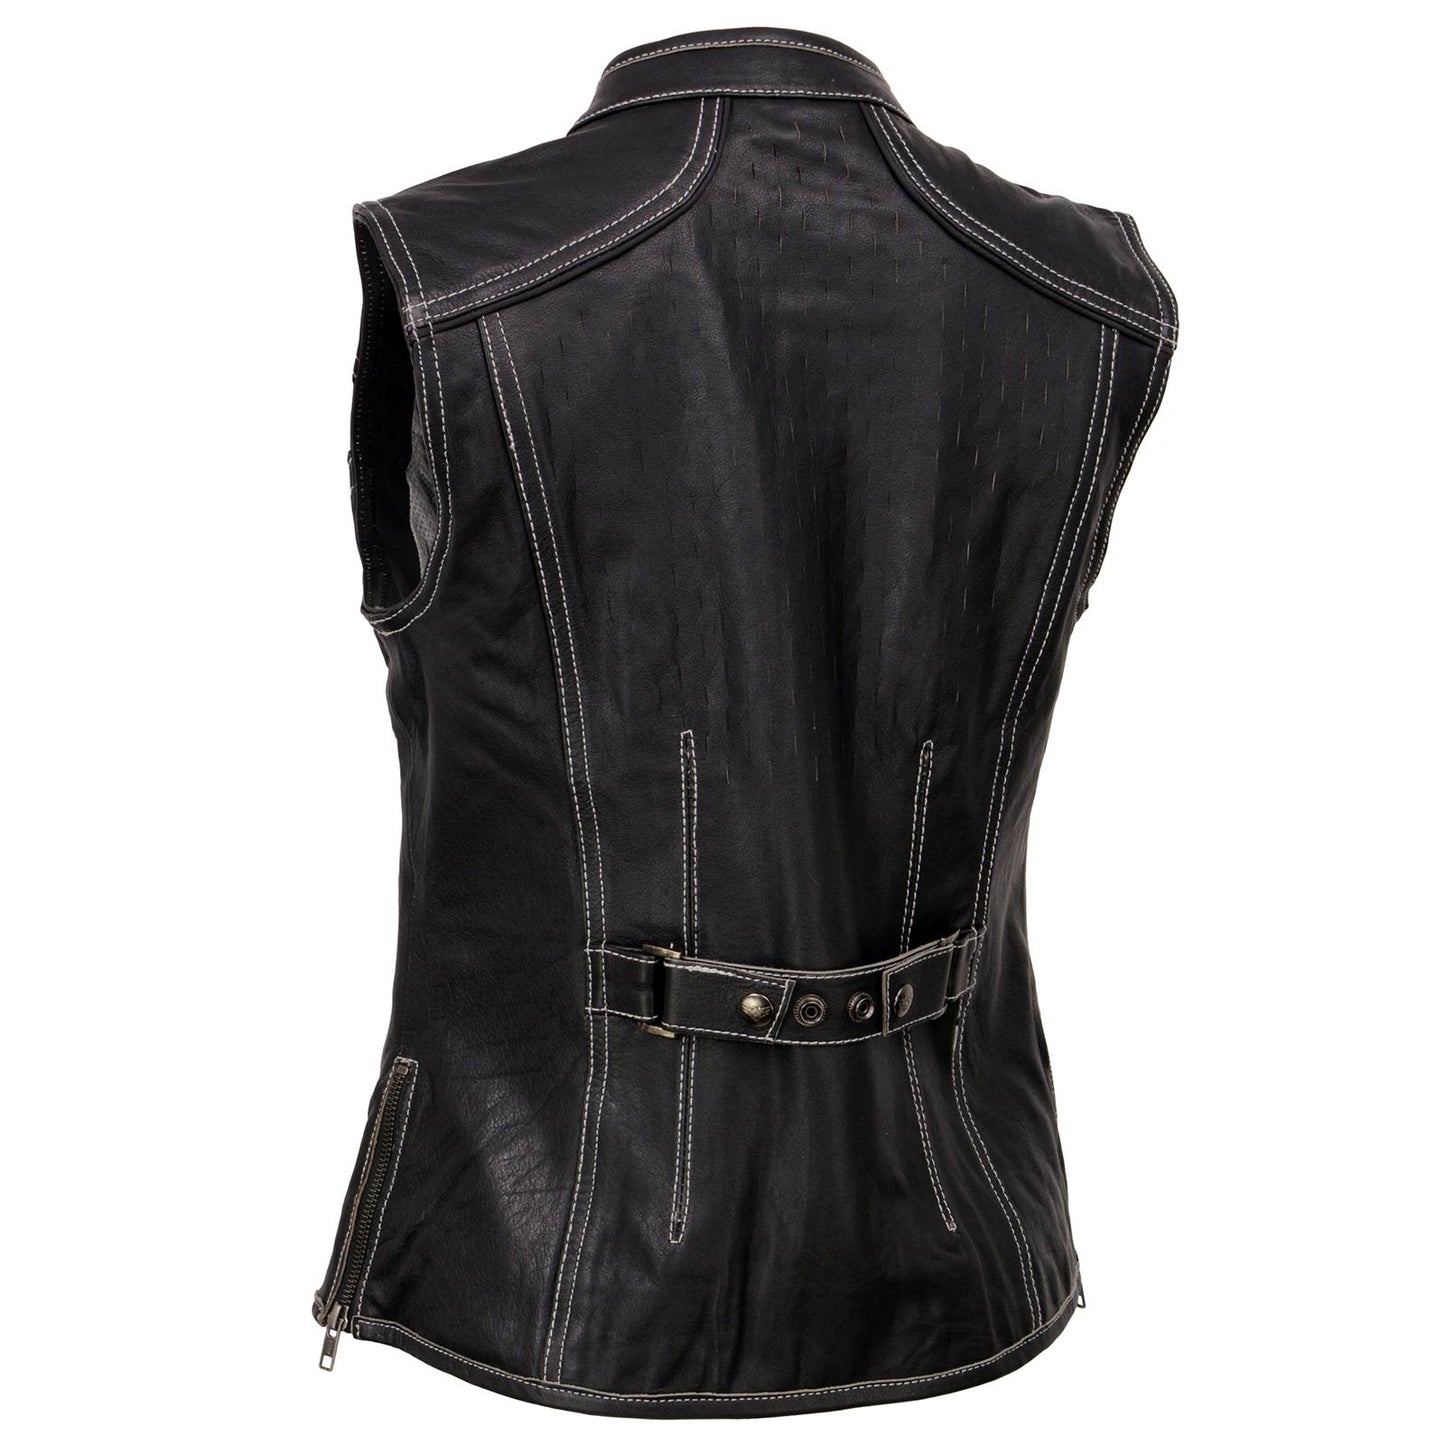 Milwaukee Leather MLL4507 Women's Black Leather Grey Accented Laser Cut Vented Scuba Style Motorcycle Rider Vest